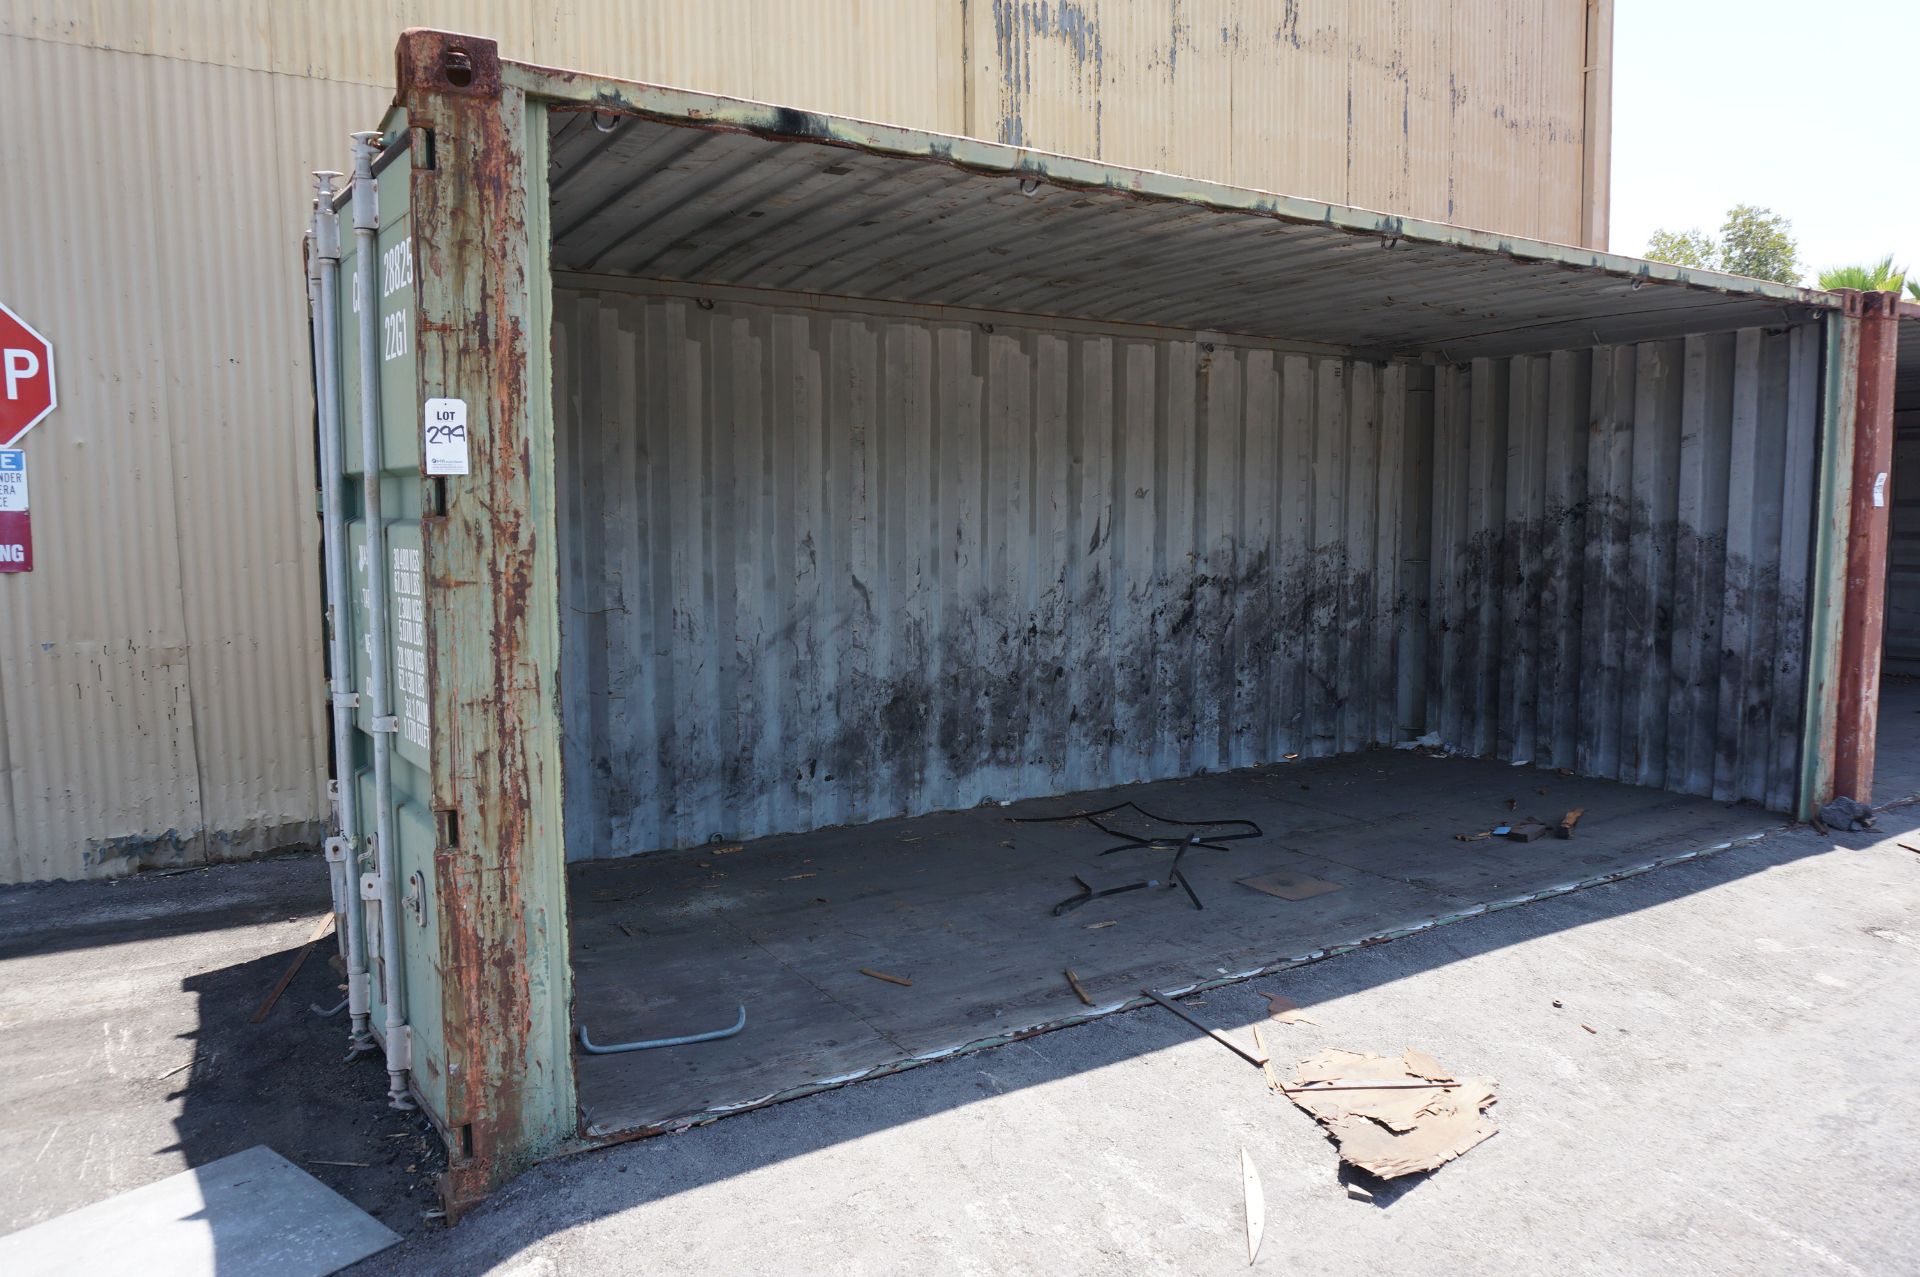 20' STEEL CONTAINER, SIDE MISSING, USED AS STORAGE